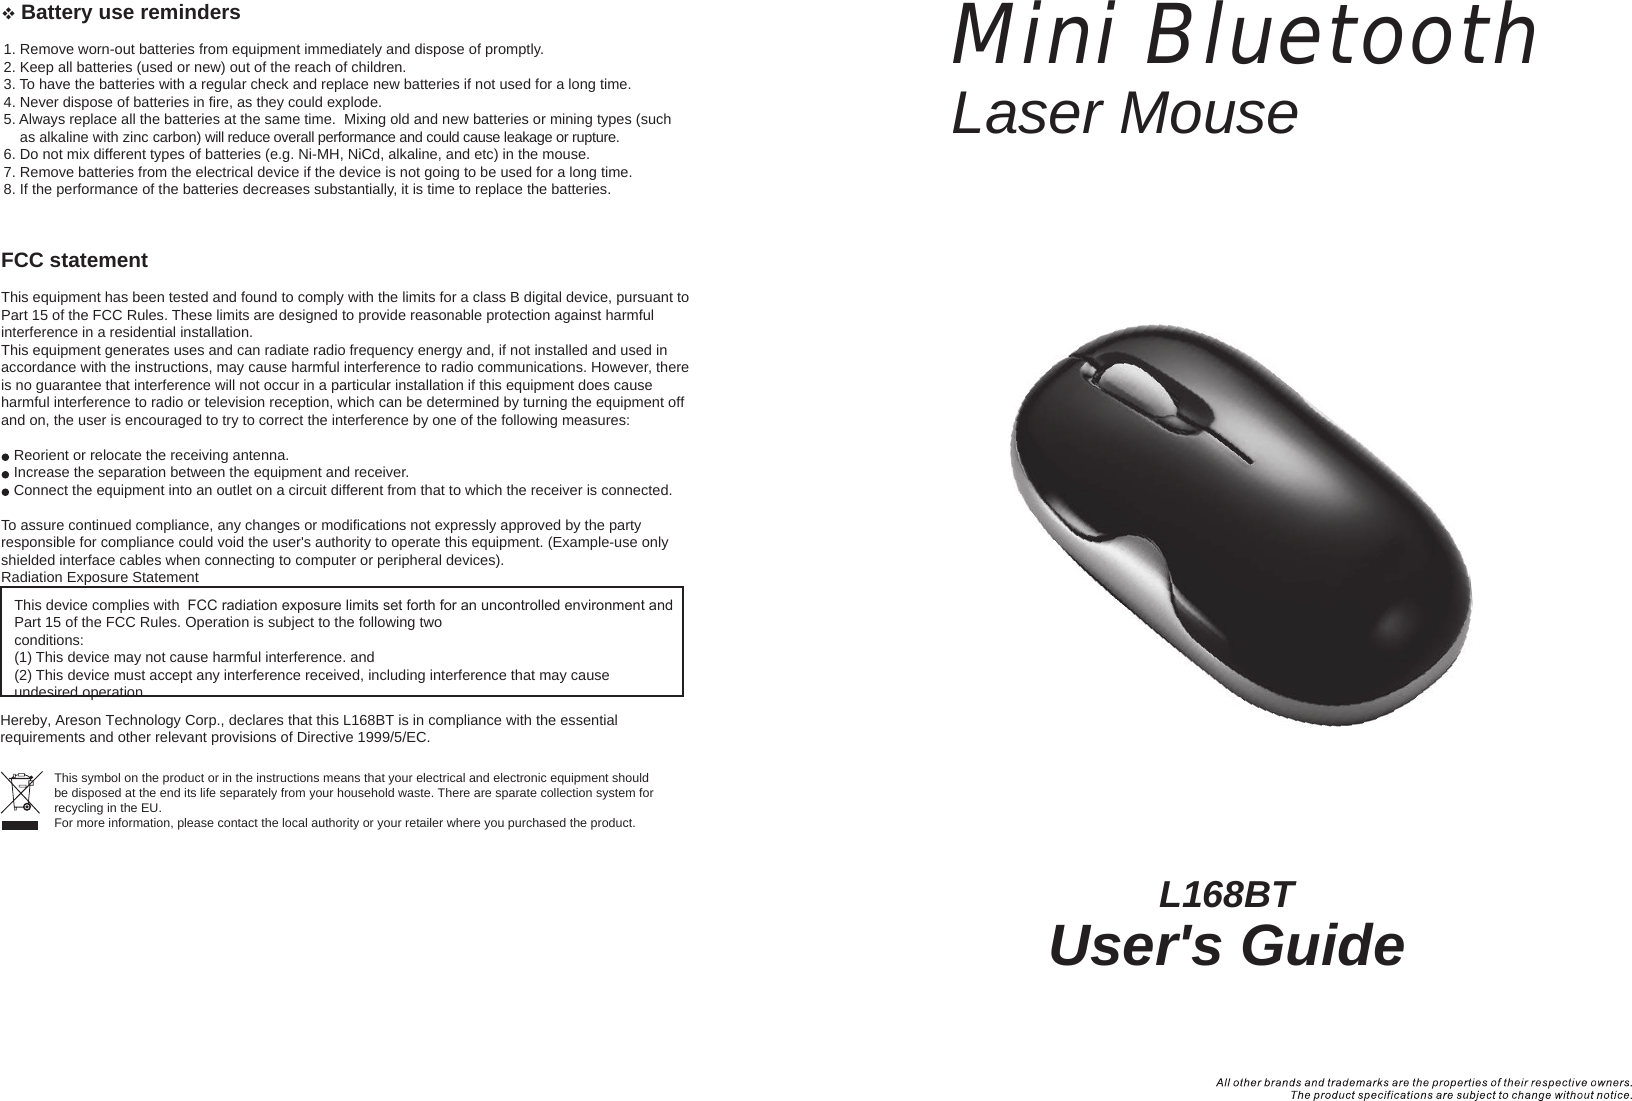 L168BTUser&apos;s GuideMini BluetoothLaser Mouse   Battery use reminders1. Remove worn-out batteries from equipment immediately and dispose of promptly.2. Keep all batteries (used or new) out of the reach of children.3. To have the batteries with a regular check and replace new batteries if not used for a long time.4. Never dispose of batteries in fire, as they could explode.5. Always replace all the batteries at the same time.  Mixing old and new batteries or mining types (such     as alkaline with zinc carbon) will reduce overall performance and could cause leakage or rupture.6. Do not mix different types of batteries (e.g. Ni-MH, NiCd, alkaline, and etc) in the mouse.7. Remove batteries from the electrical device if the device is not going to be used for a long time.8. If the performance of the batteries decreases substantially, it is time to replace the batteries.FCC statementThis equipment has been tested and found to comply with the limits for a class B digital device, pursuant to Part 15 of the FCC Rules. These limits are designed to provide reasonable protection against harmful interference in a residential installation.This equipment generates uses and can radiate radio frequency energy and, if not installed and used in accordance with the instructions, may cause harmful interference to radio communications. However, there is no guarantee that interference will not occur in a particular installation if this equipment does cause harmful interference to radio or television reception, which can be determined by turning the equipment off and on, the user is encouraged to try to correct the interference by one of the following measures:Reorient or relocate the receiving antenna.Increase the separation between the equipment and receiver.Connect the equipment into an outlet on a circuit different from that to which the receiver is connected.To assure continued compliance, any changes or modifications not expressly approved by the party responsible for compliance could void the user&apos;s authority to operate this equipment. (Example-use only shielded interface cables when connecting to computer or peripheral devices).Radiation Exposure Statement This device complies with  FCC radiation exposure limits set forth for an uncontrolled environment and Part 15 of the FCC Rules. Operation is subject to the following two conditions:(1) This device may not cause harmful interference. and (2) This device must accept any interference received, including interference that may cause undesired operation.This symbol on the product or in the instructions means that your electrical and electronic equipment should be disposed at the end its life separately from your household waste. There are sparate collection system for recycling in the EU.For more information, please contact the local authority or your retailer where you purchased the product.Hereby, Areson Technology Corp., declares that this L168BT is in compliance with the essential requirements and other relevant provisions of Directive 1999/5/EC.